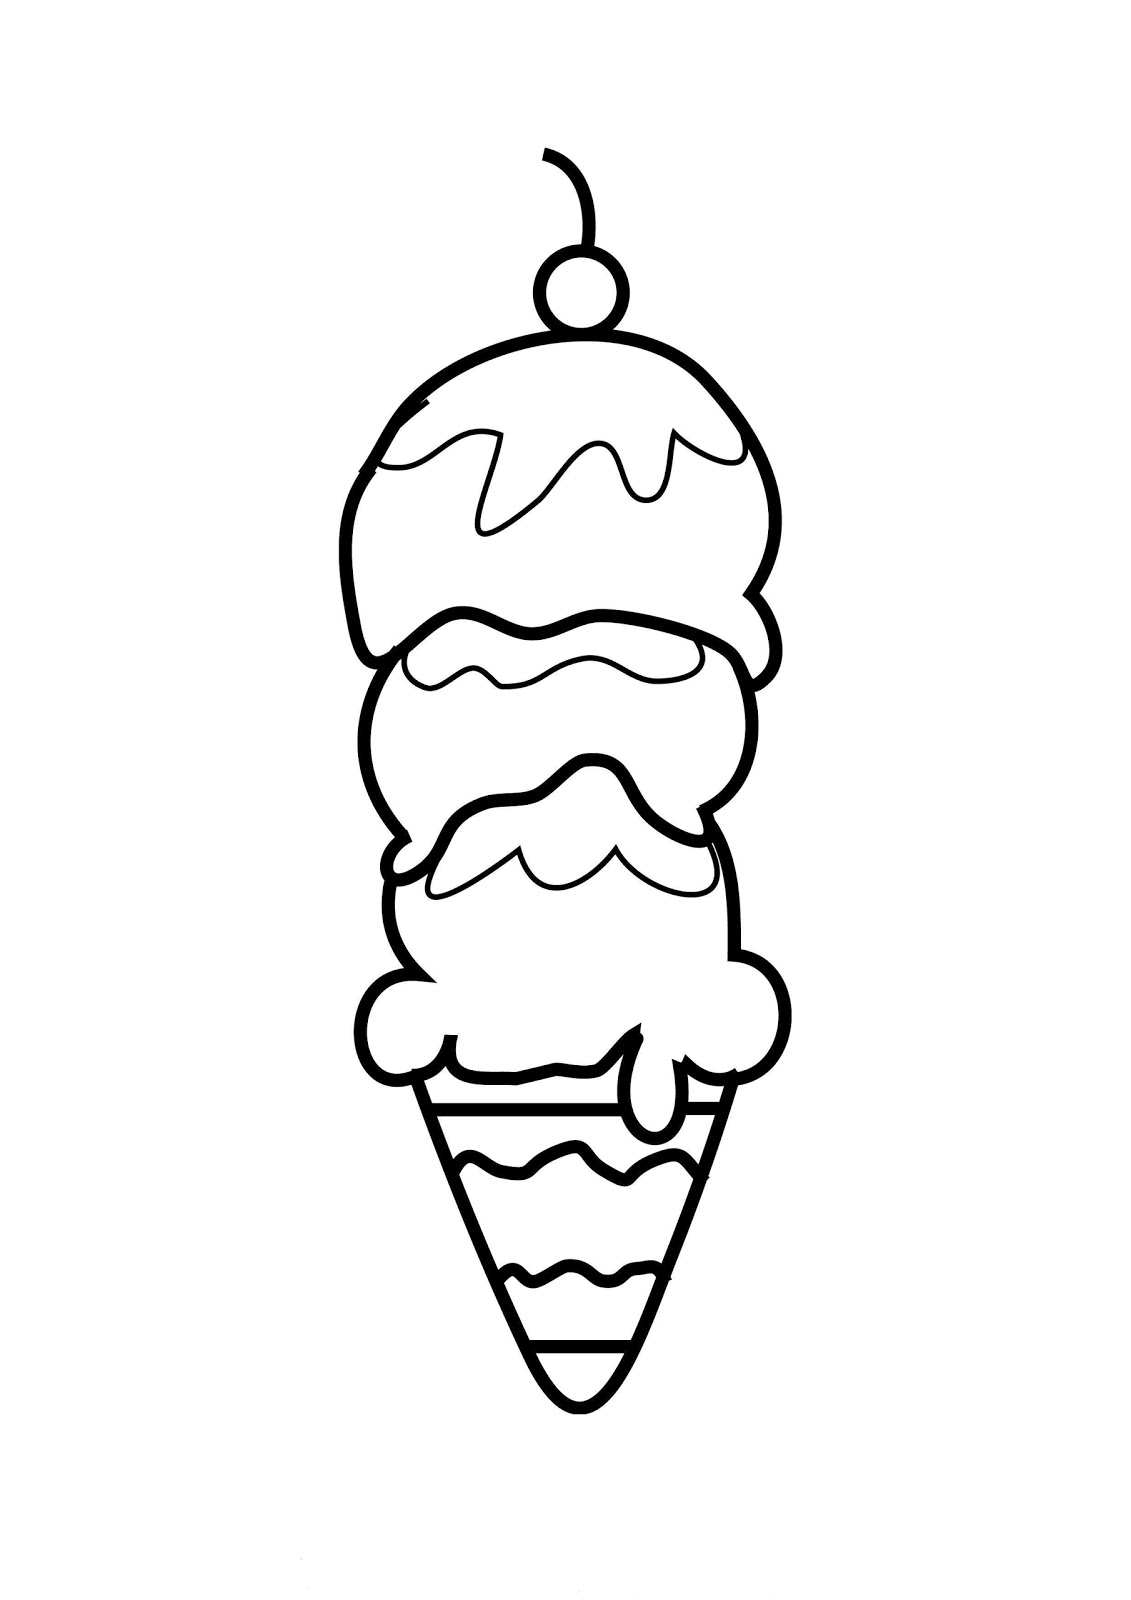 Download Ice Cream Cone Coloring Page Pictures - Coloring Page For Kids